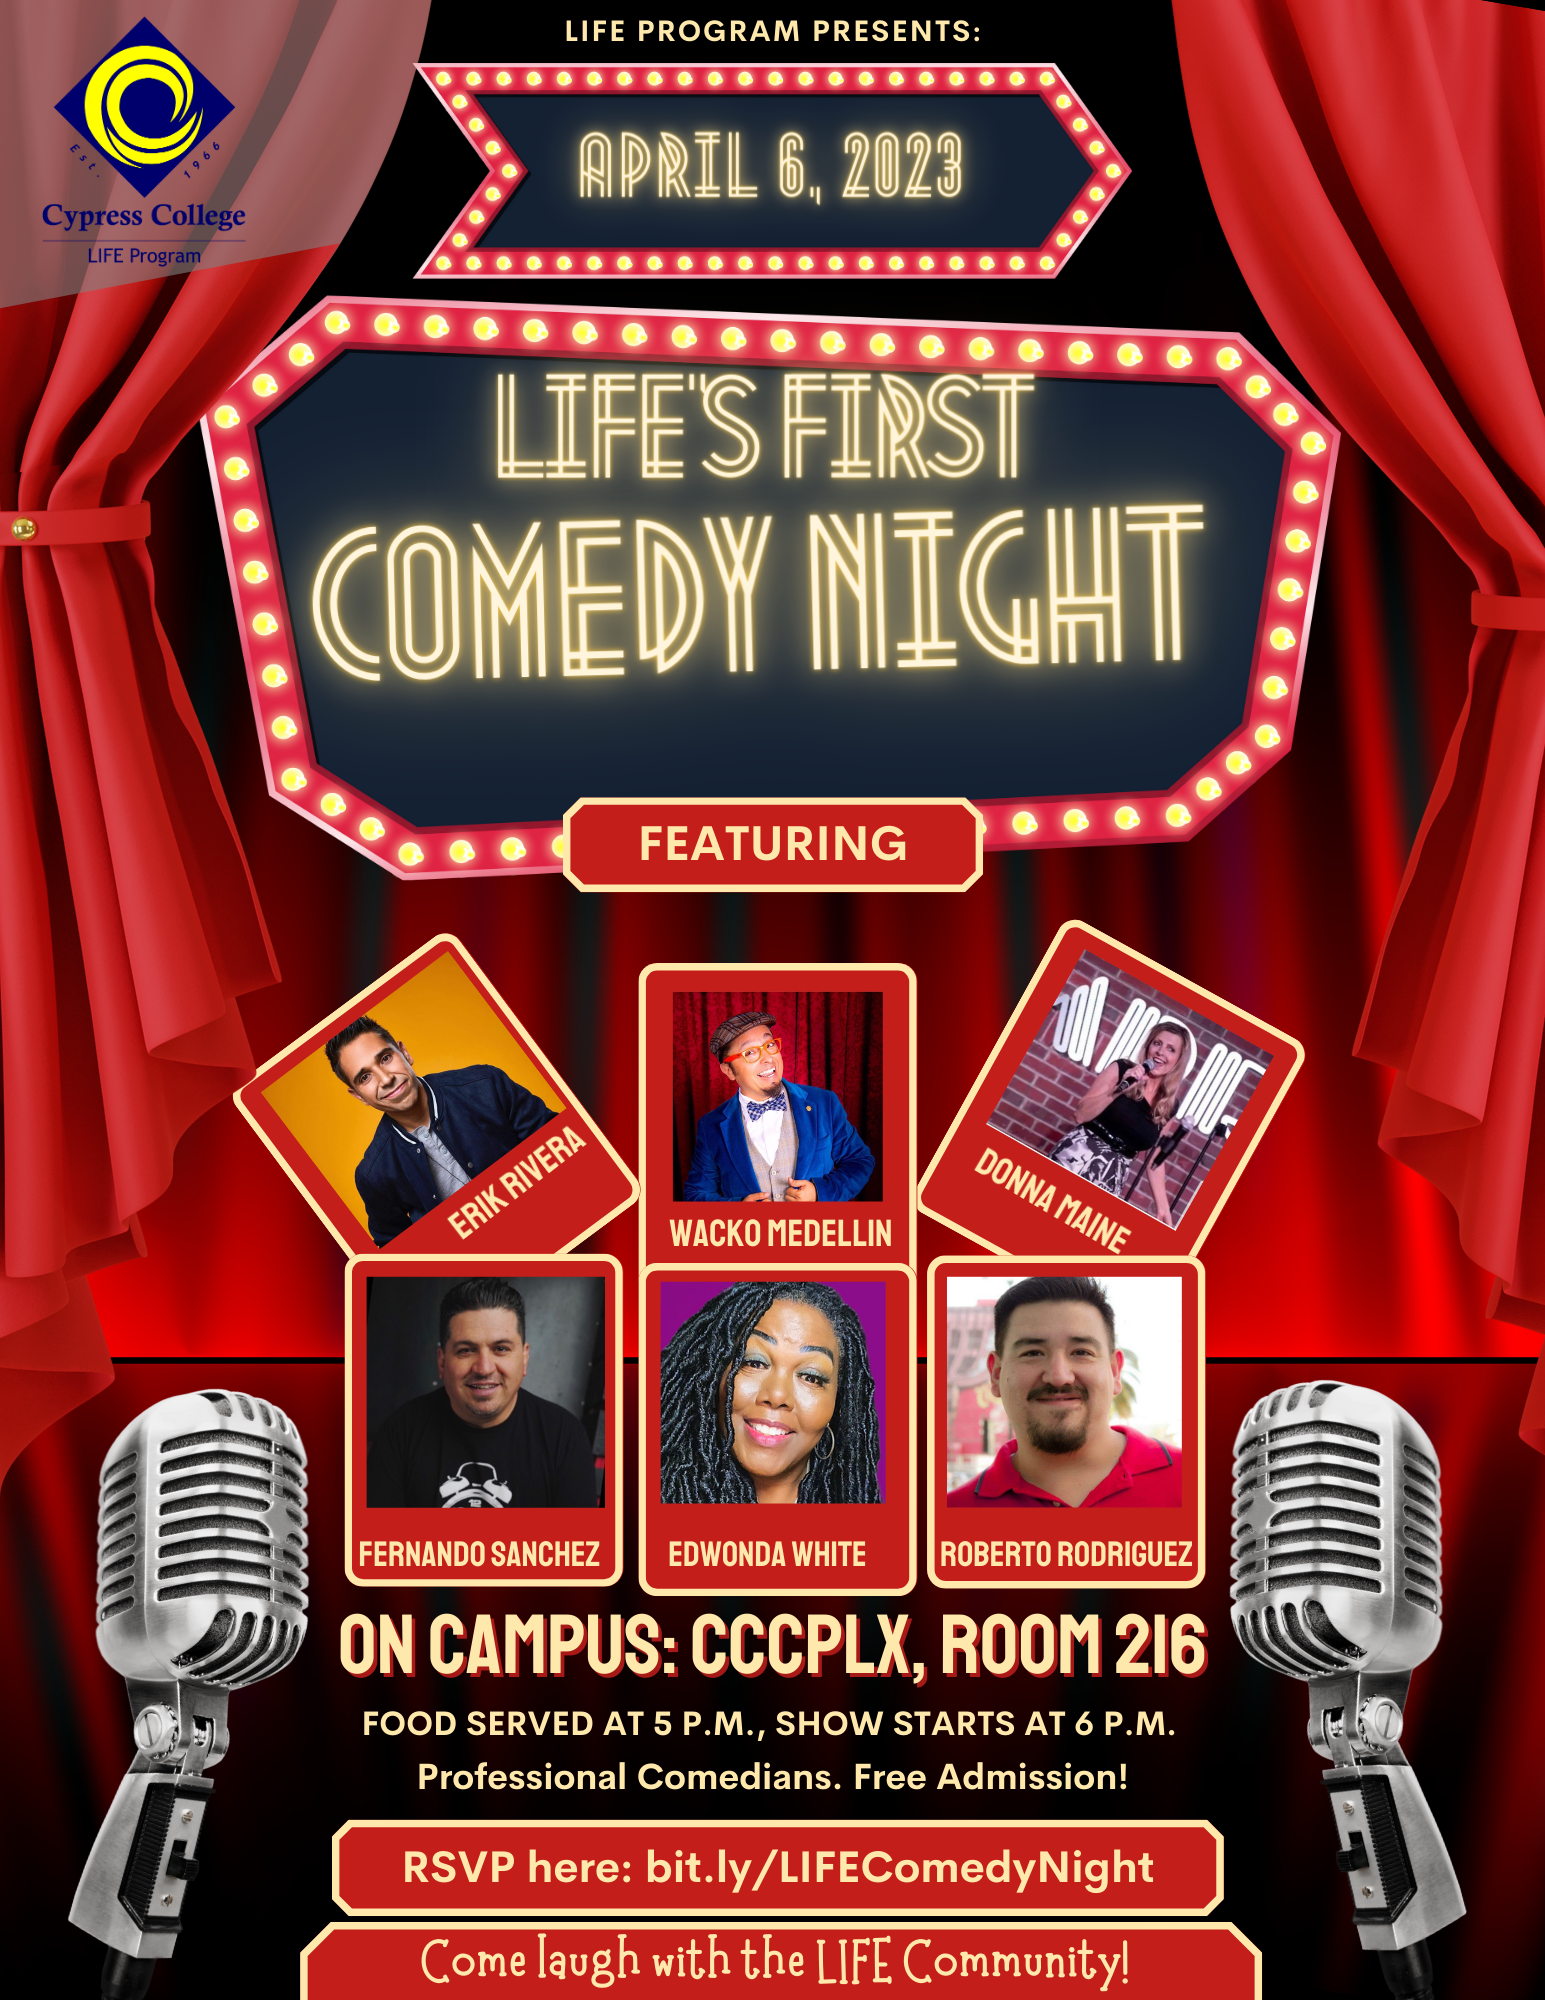 Comedy Night event flyer